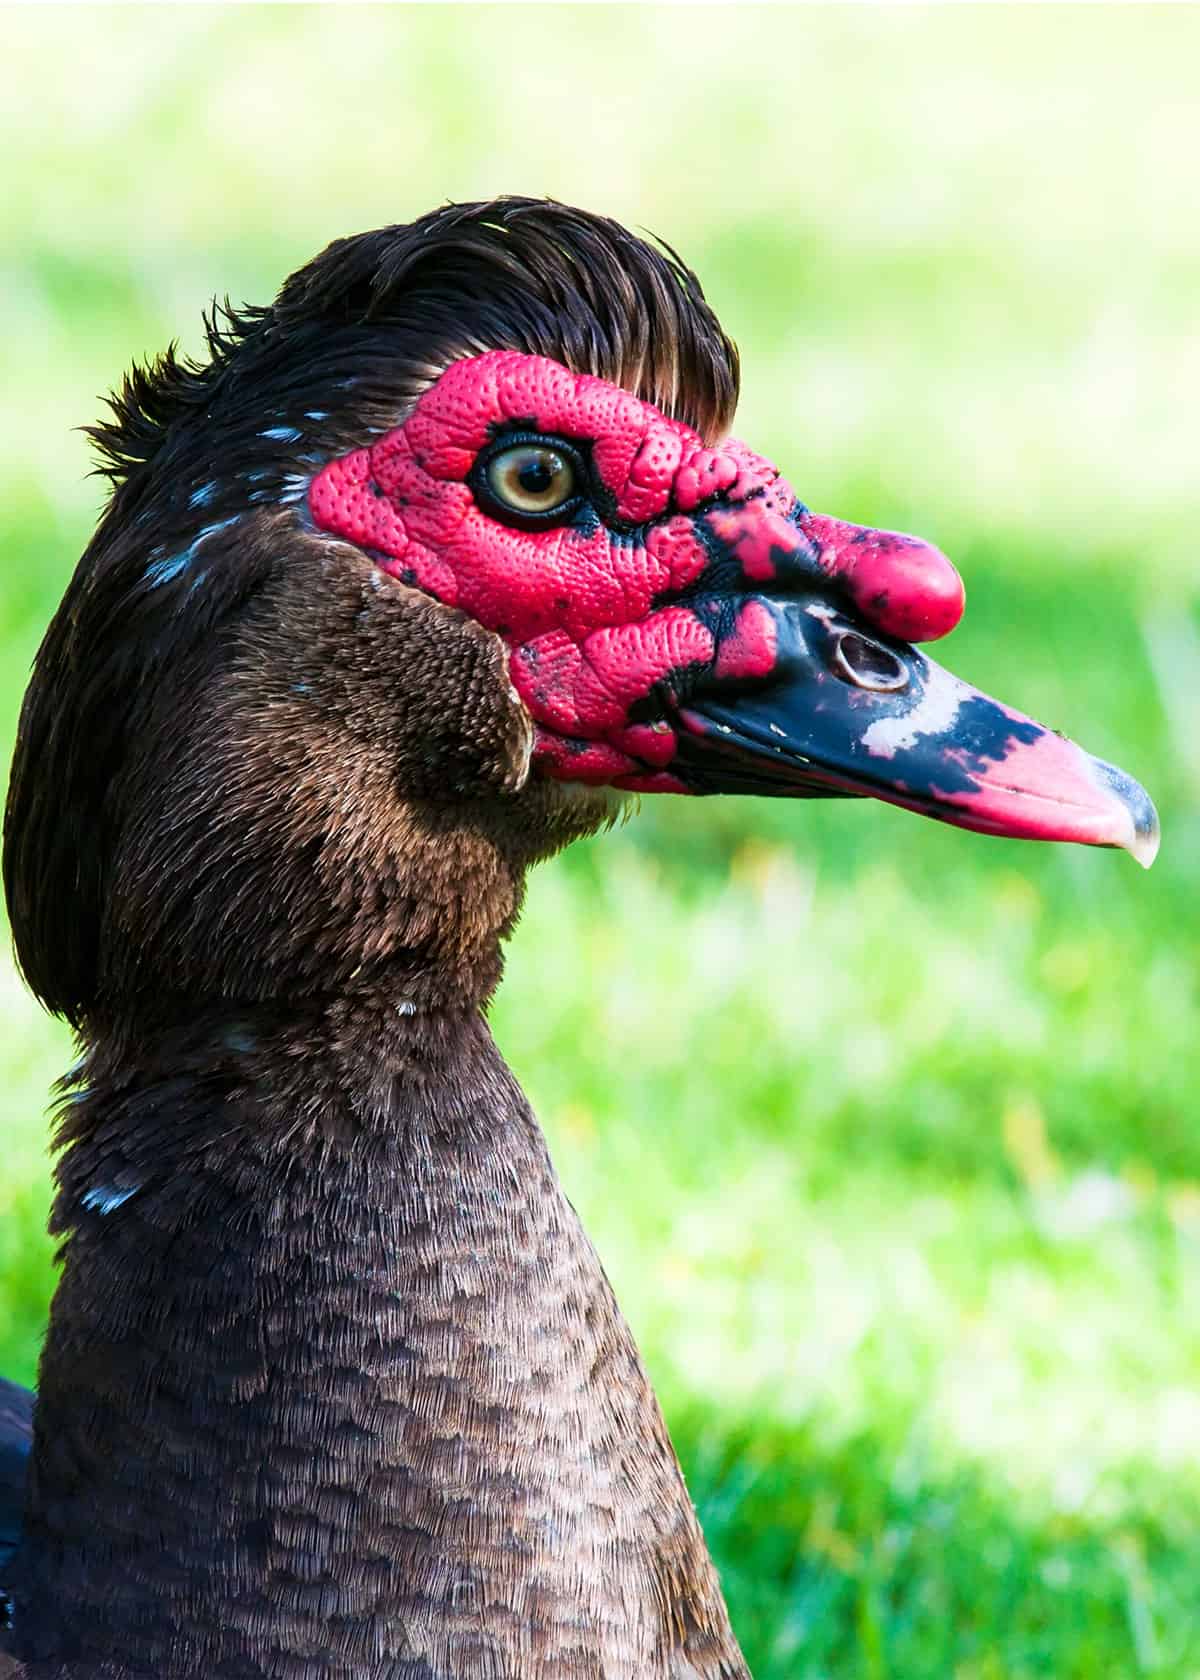 Facts about muscovy ducks